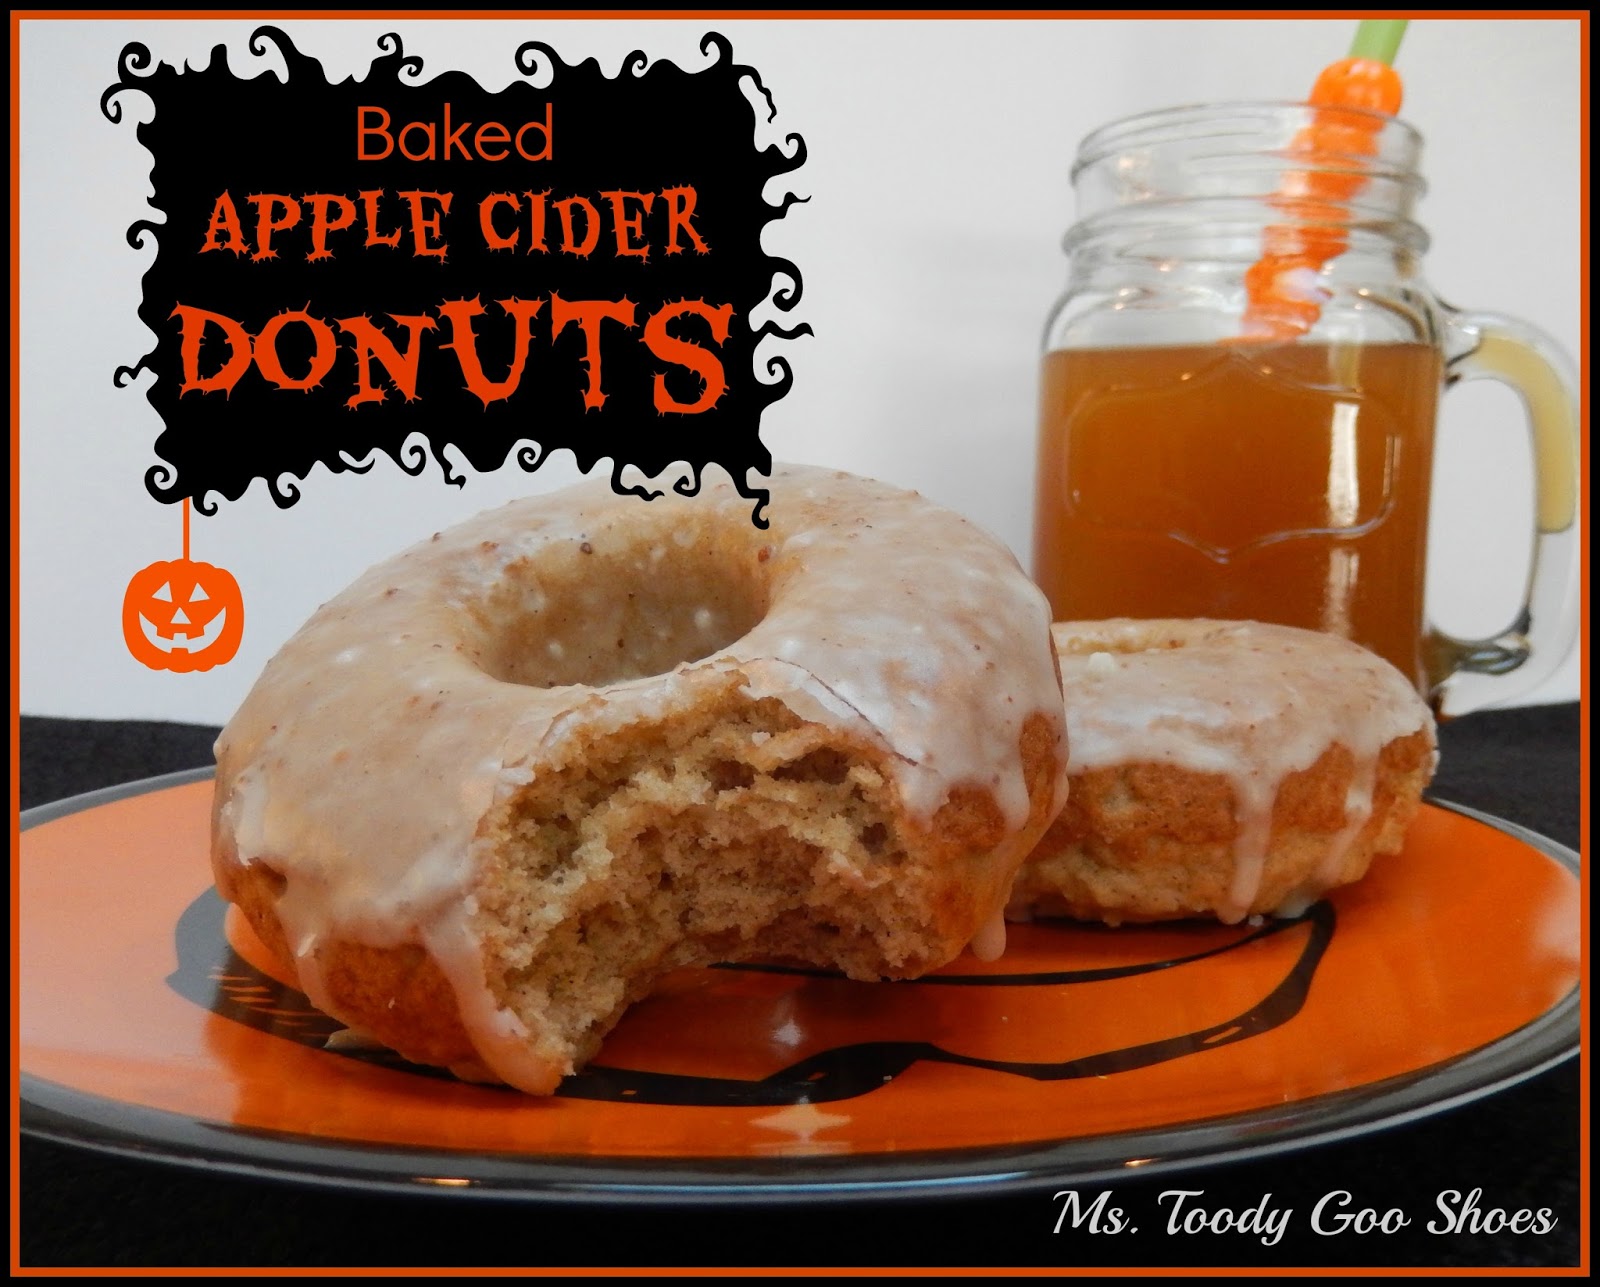 Baked Apple Cider Donuts by Ms. Toody Goo Shoes